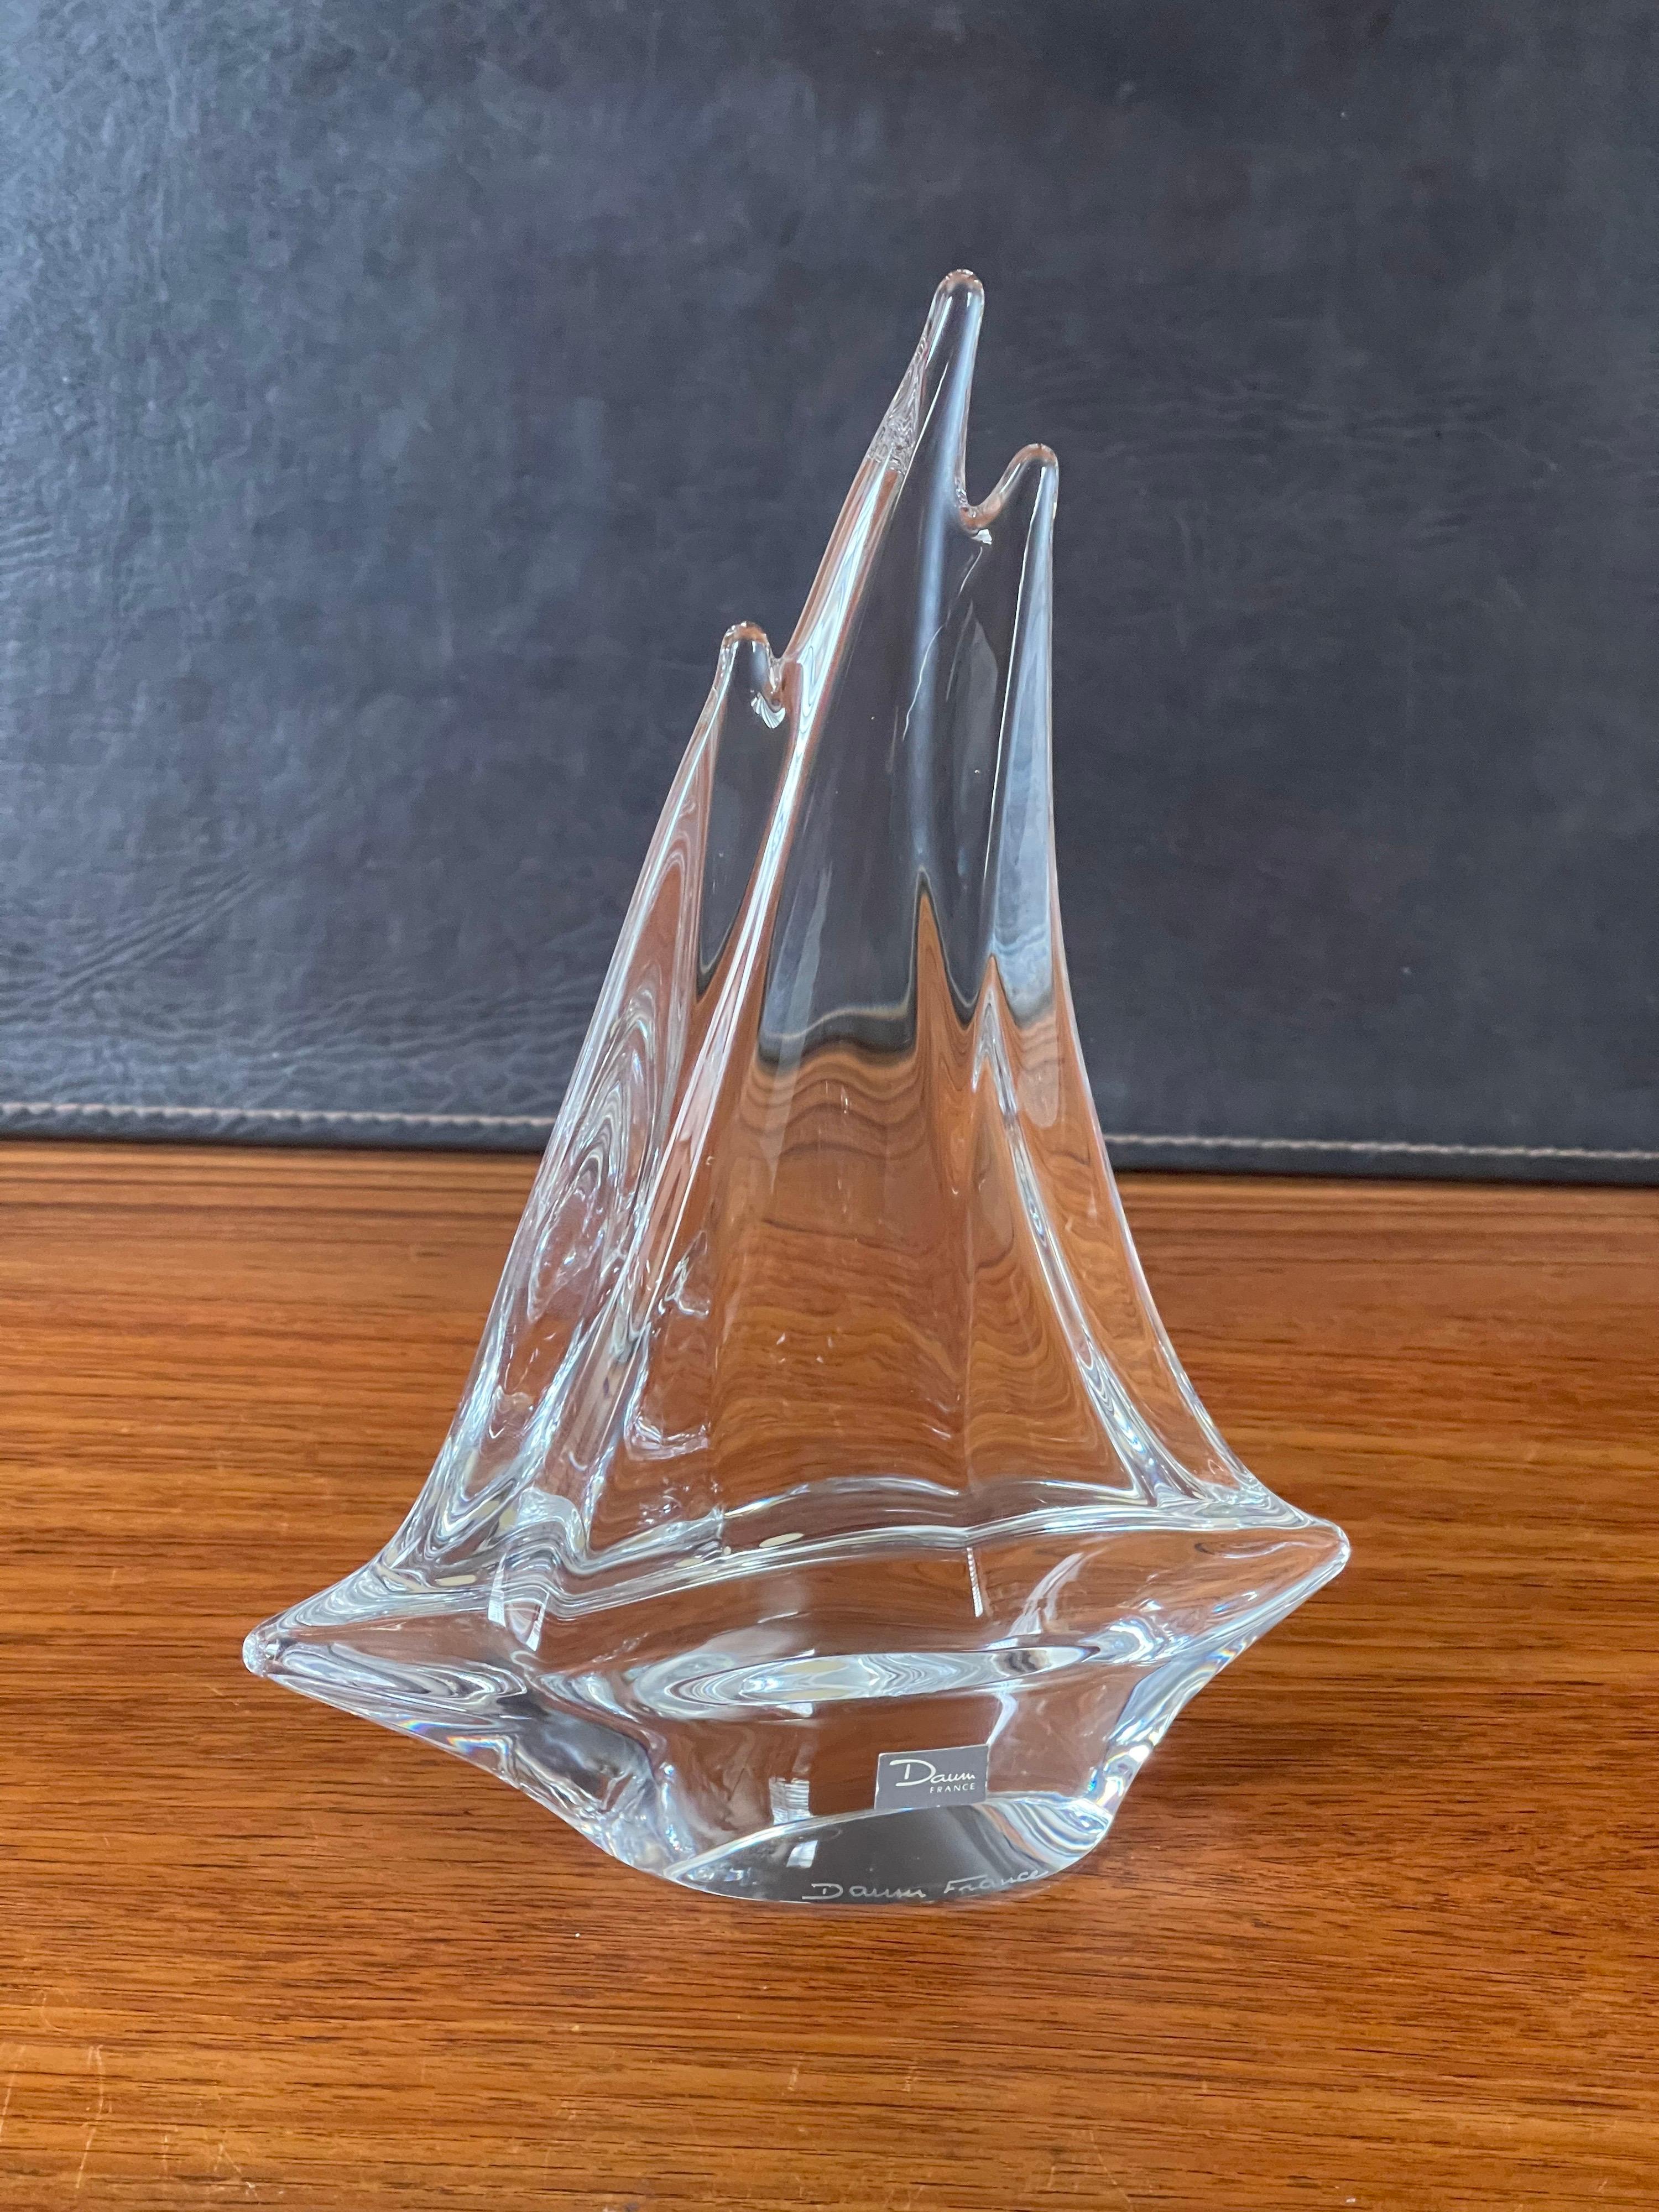 Gorgeous crystal sailboat sculpture by Daum, France, circa 2000s. The sculpture is in excellent condition with no chips or scratches and measures 7.5